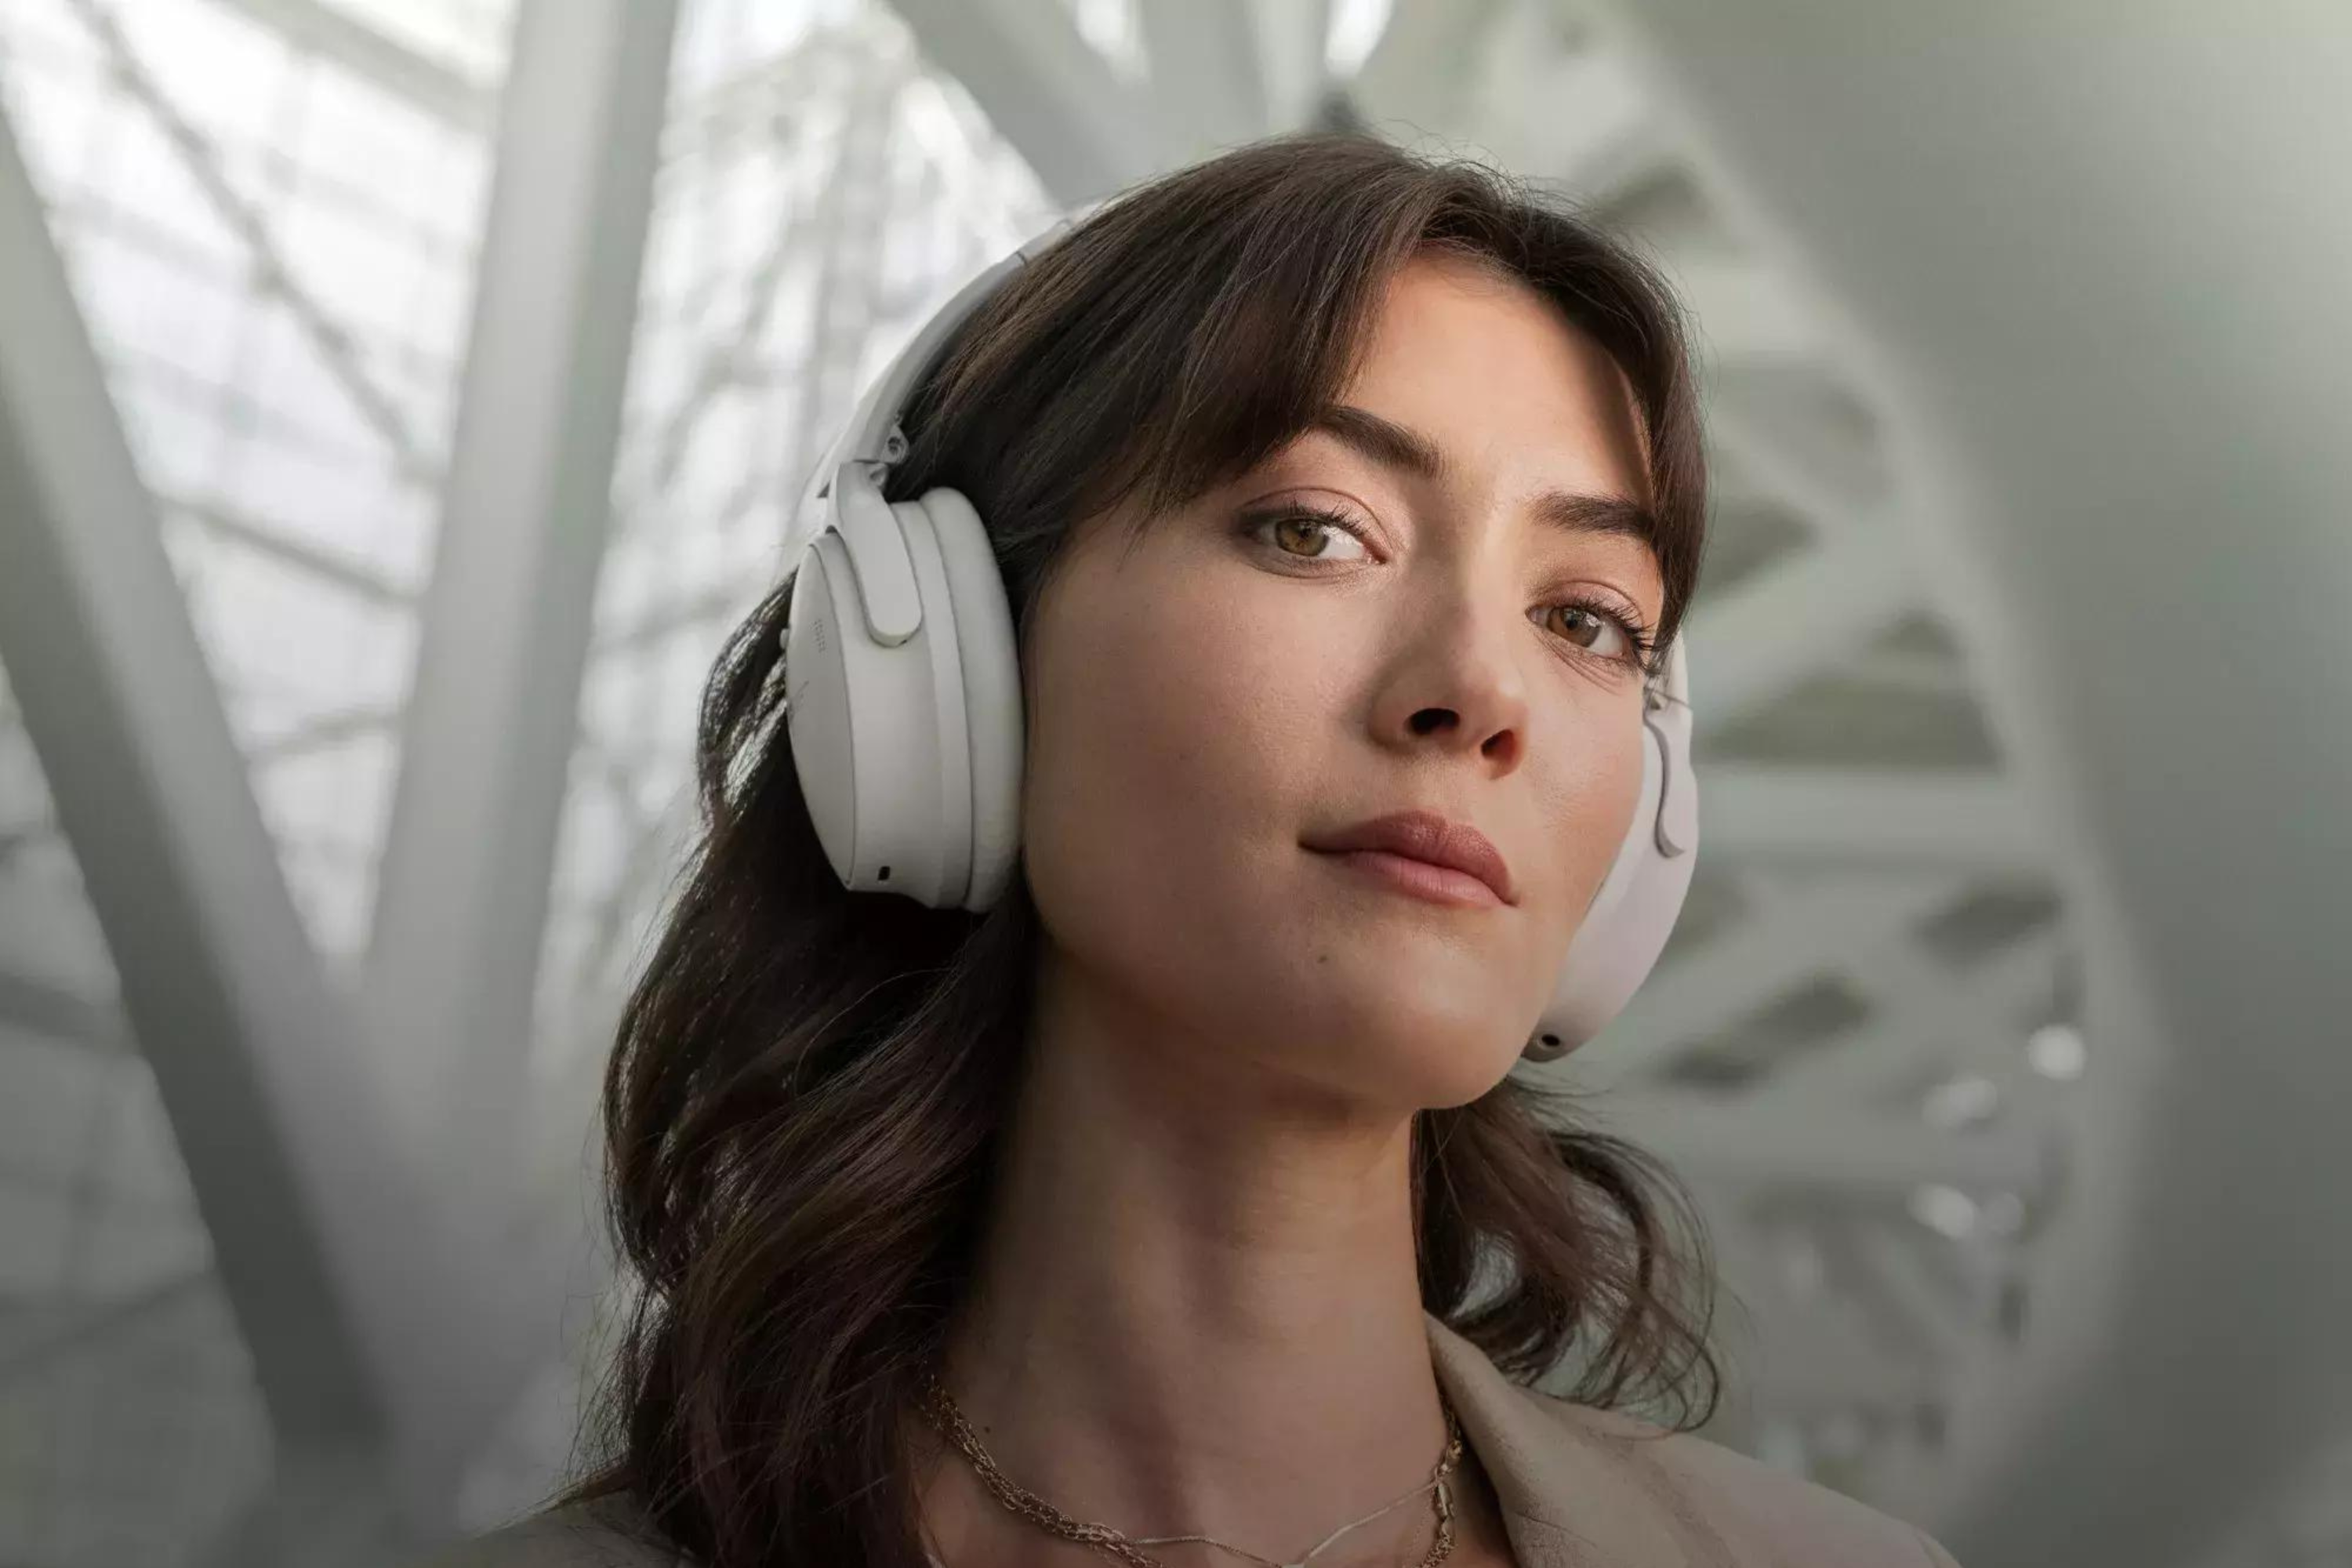 Bose QuietComfort 45 Headphones on the head of a person looking directly at the camera